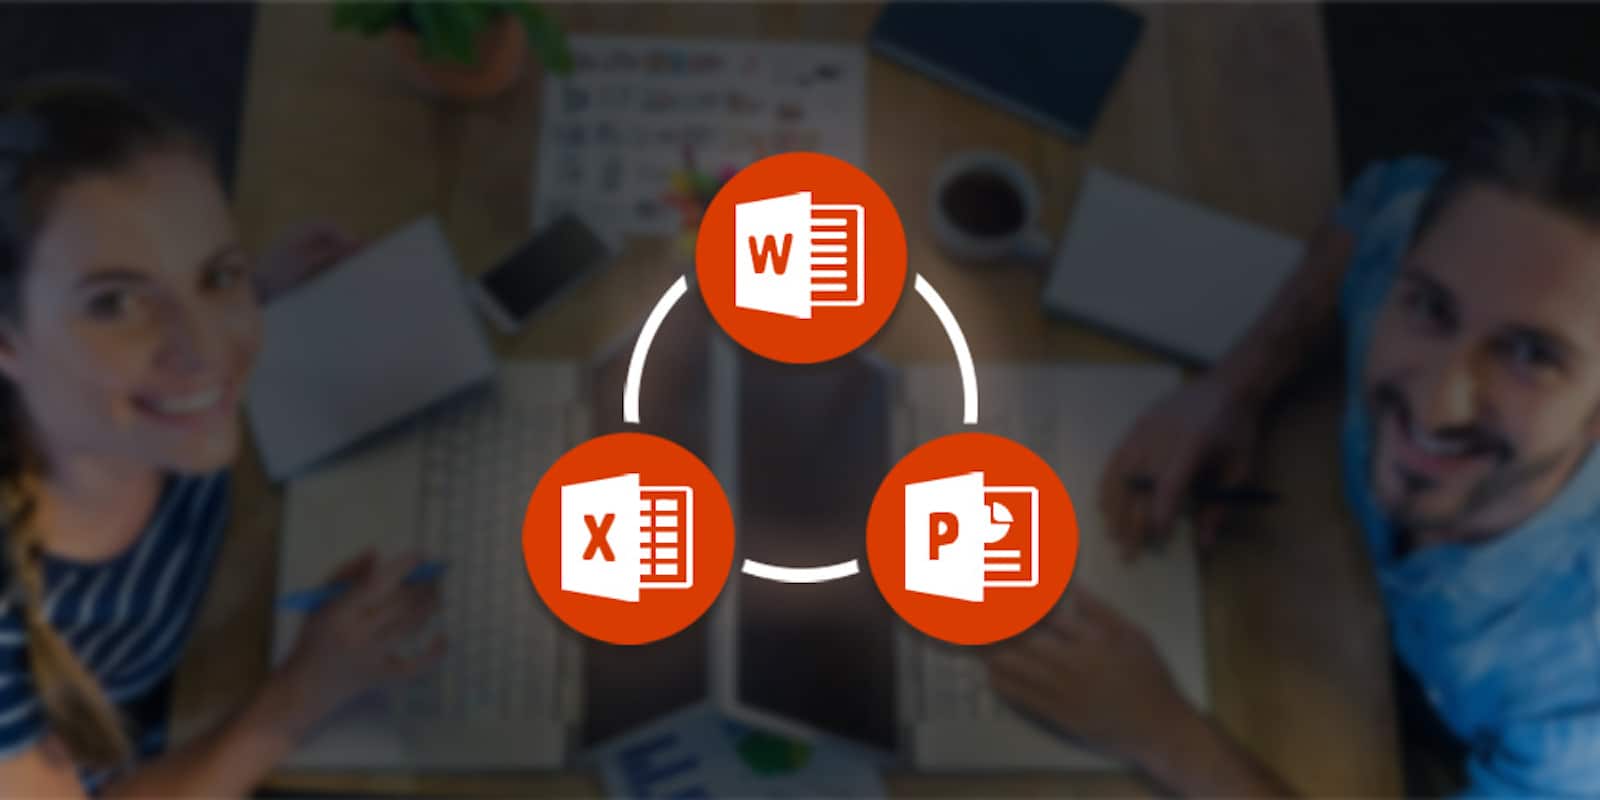 Up your skills in Microsoft Office, one of the most widely-used productivity platforms.